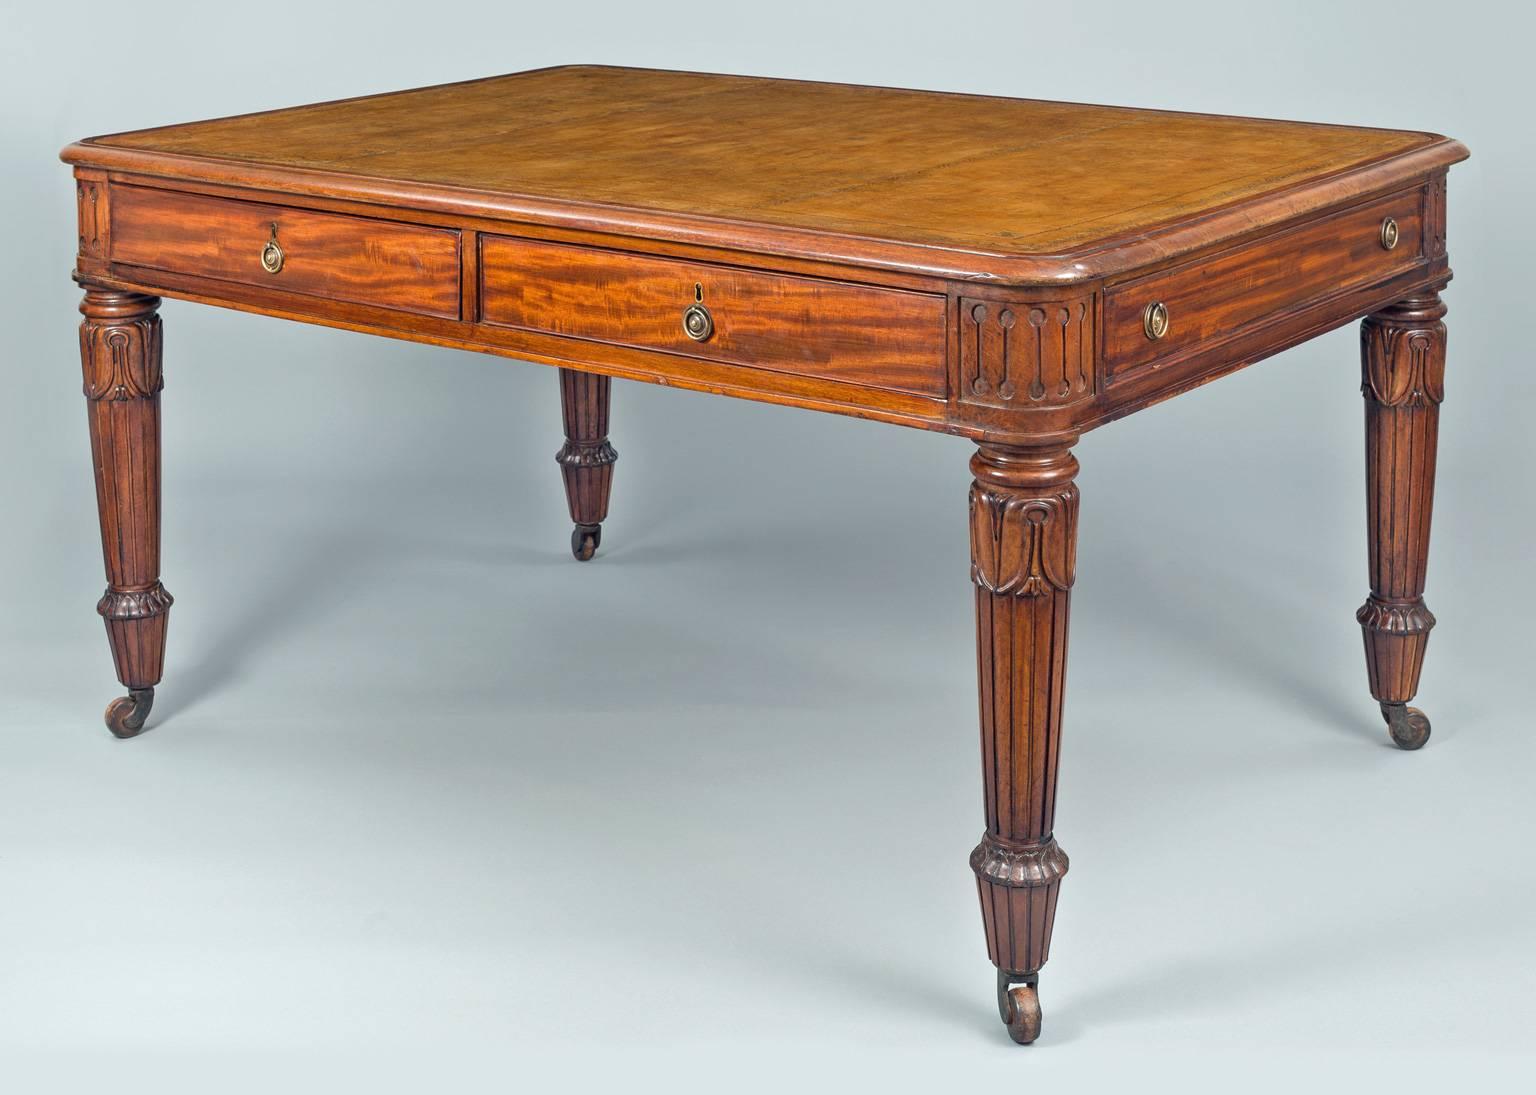 Antique late Regency mahogany partners writing table, the top with golden brown leather insert with gilt tooling, two drawers on each side with brass ring pulls, frieze corners are carved, top of leg with ring turning above acanthus leaf carving,